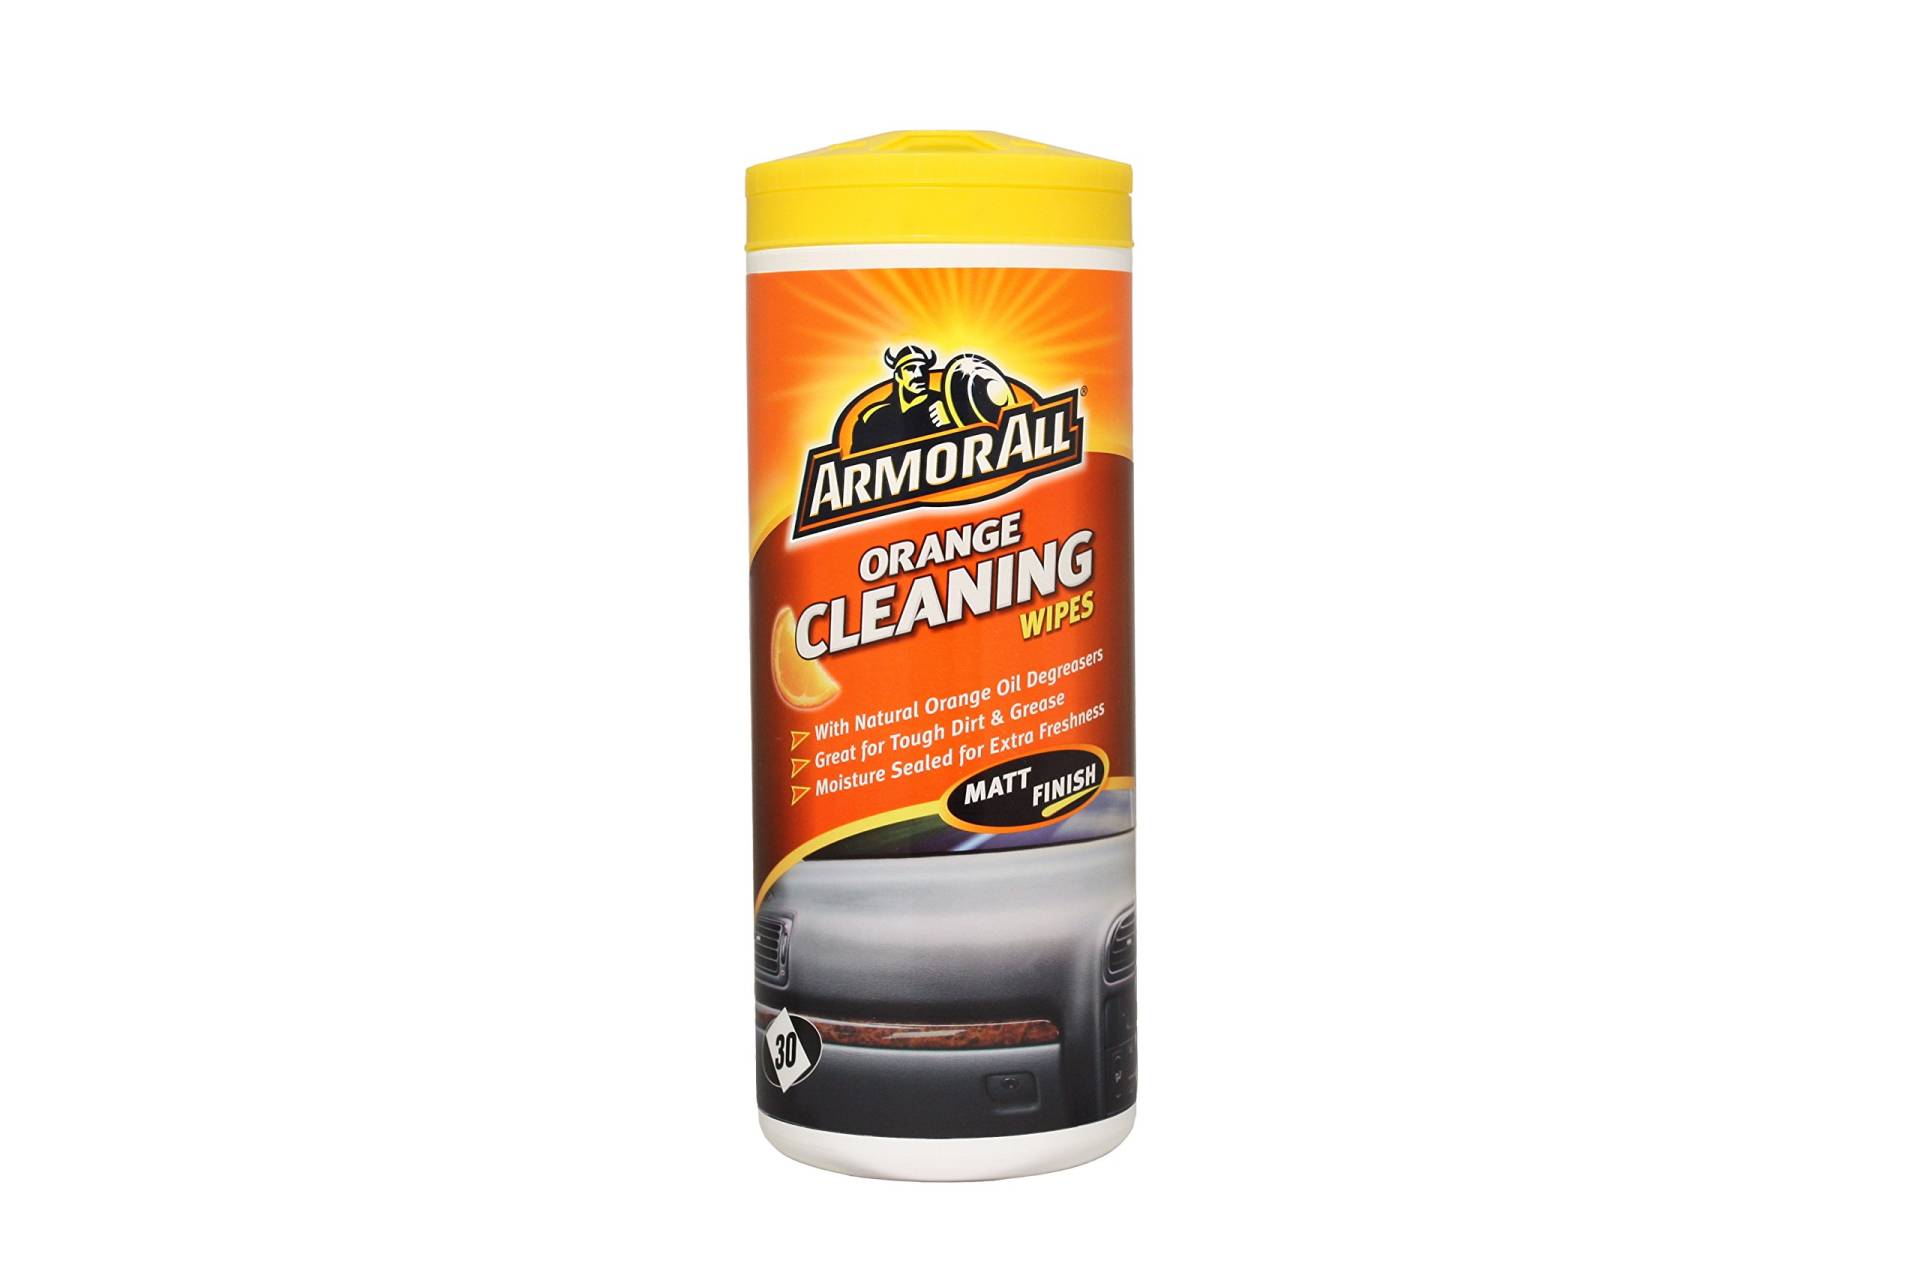 Armor All Orange Cleaning Wipes - Set of 30 von Armor All